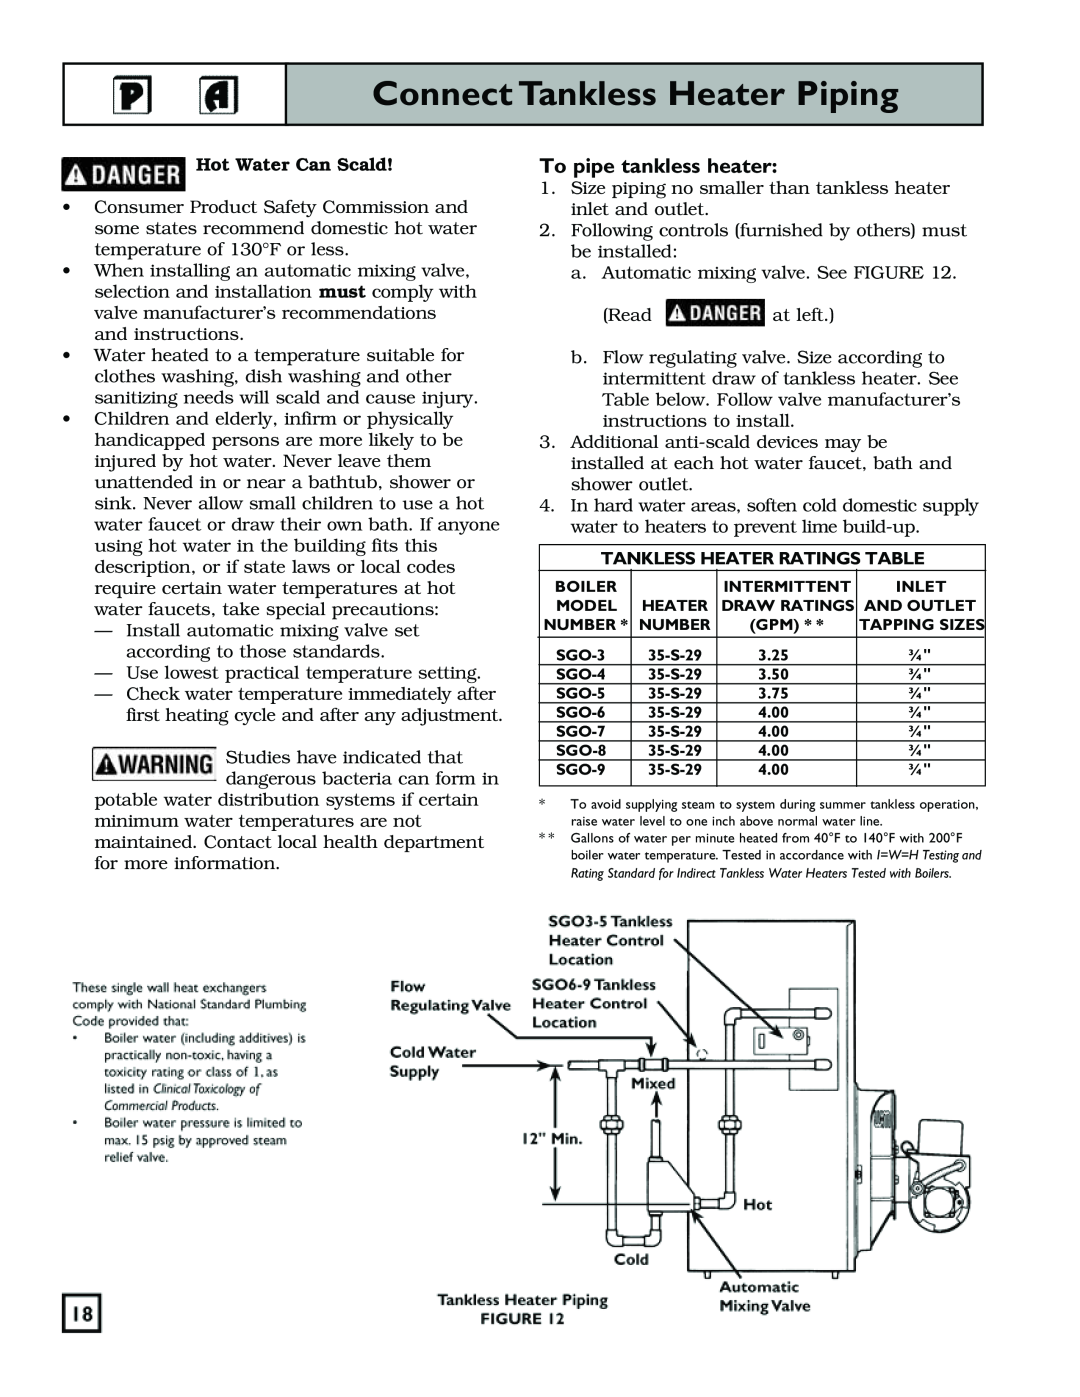 Weil-McLain 550-141-829/1201 manual Connect Tankless Heater Piping, To pipe tankless heater, Hot Water Can Scald 